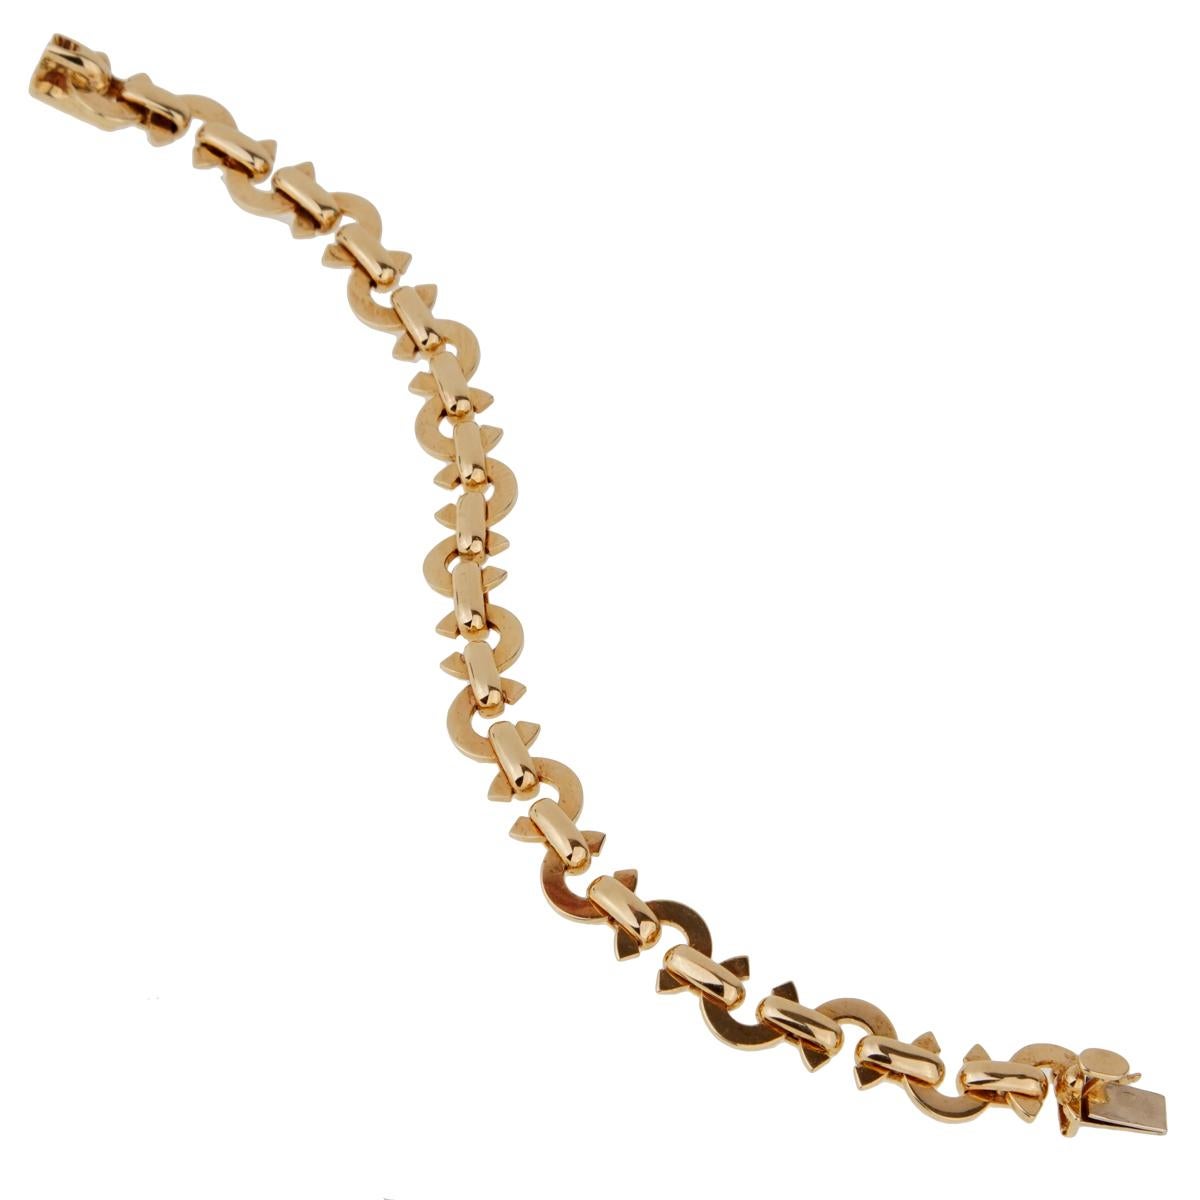 Chanel Yellow Gold C Charm Bracelet In Good Condition For Sale In Feasterville, PA